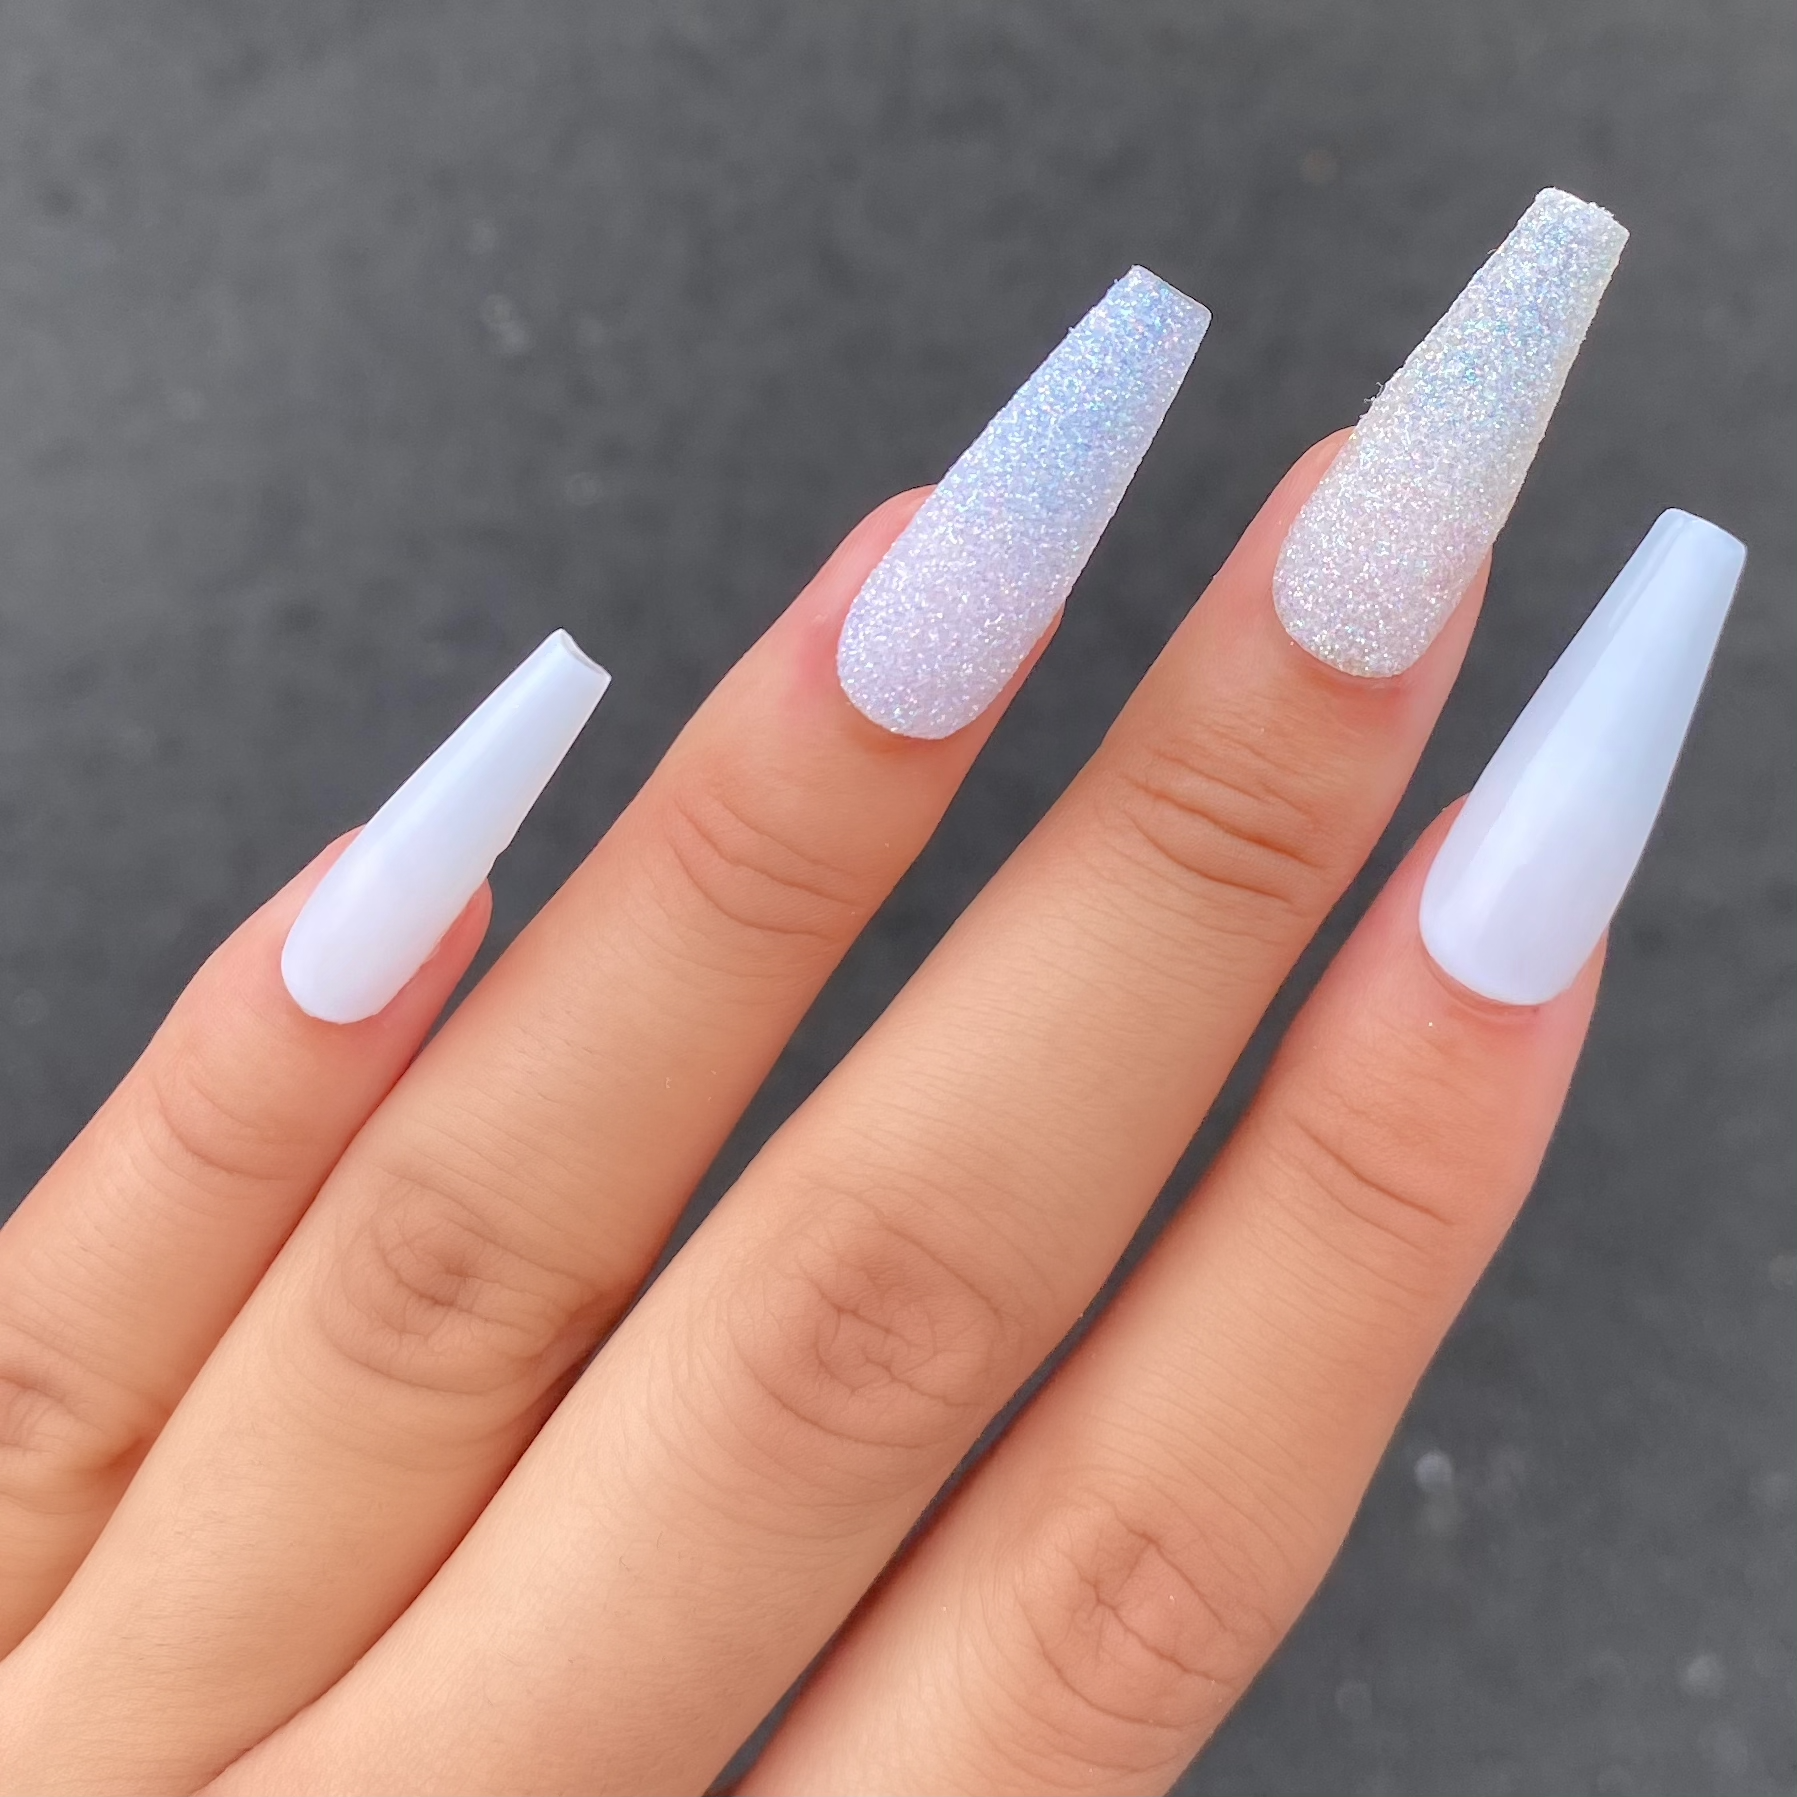 – Adore Luxe Nails